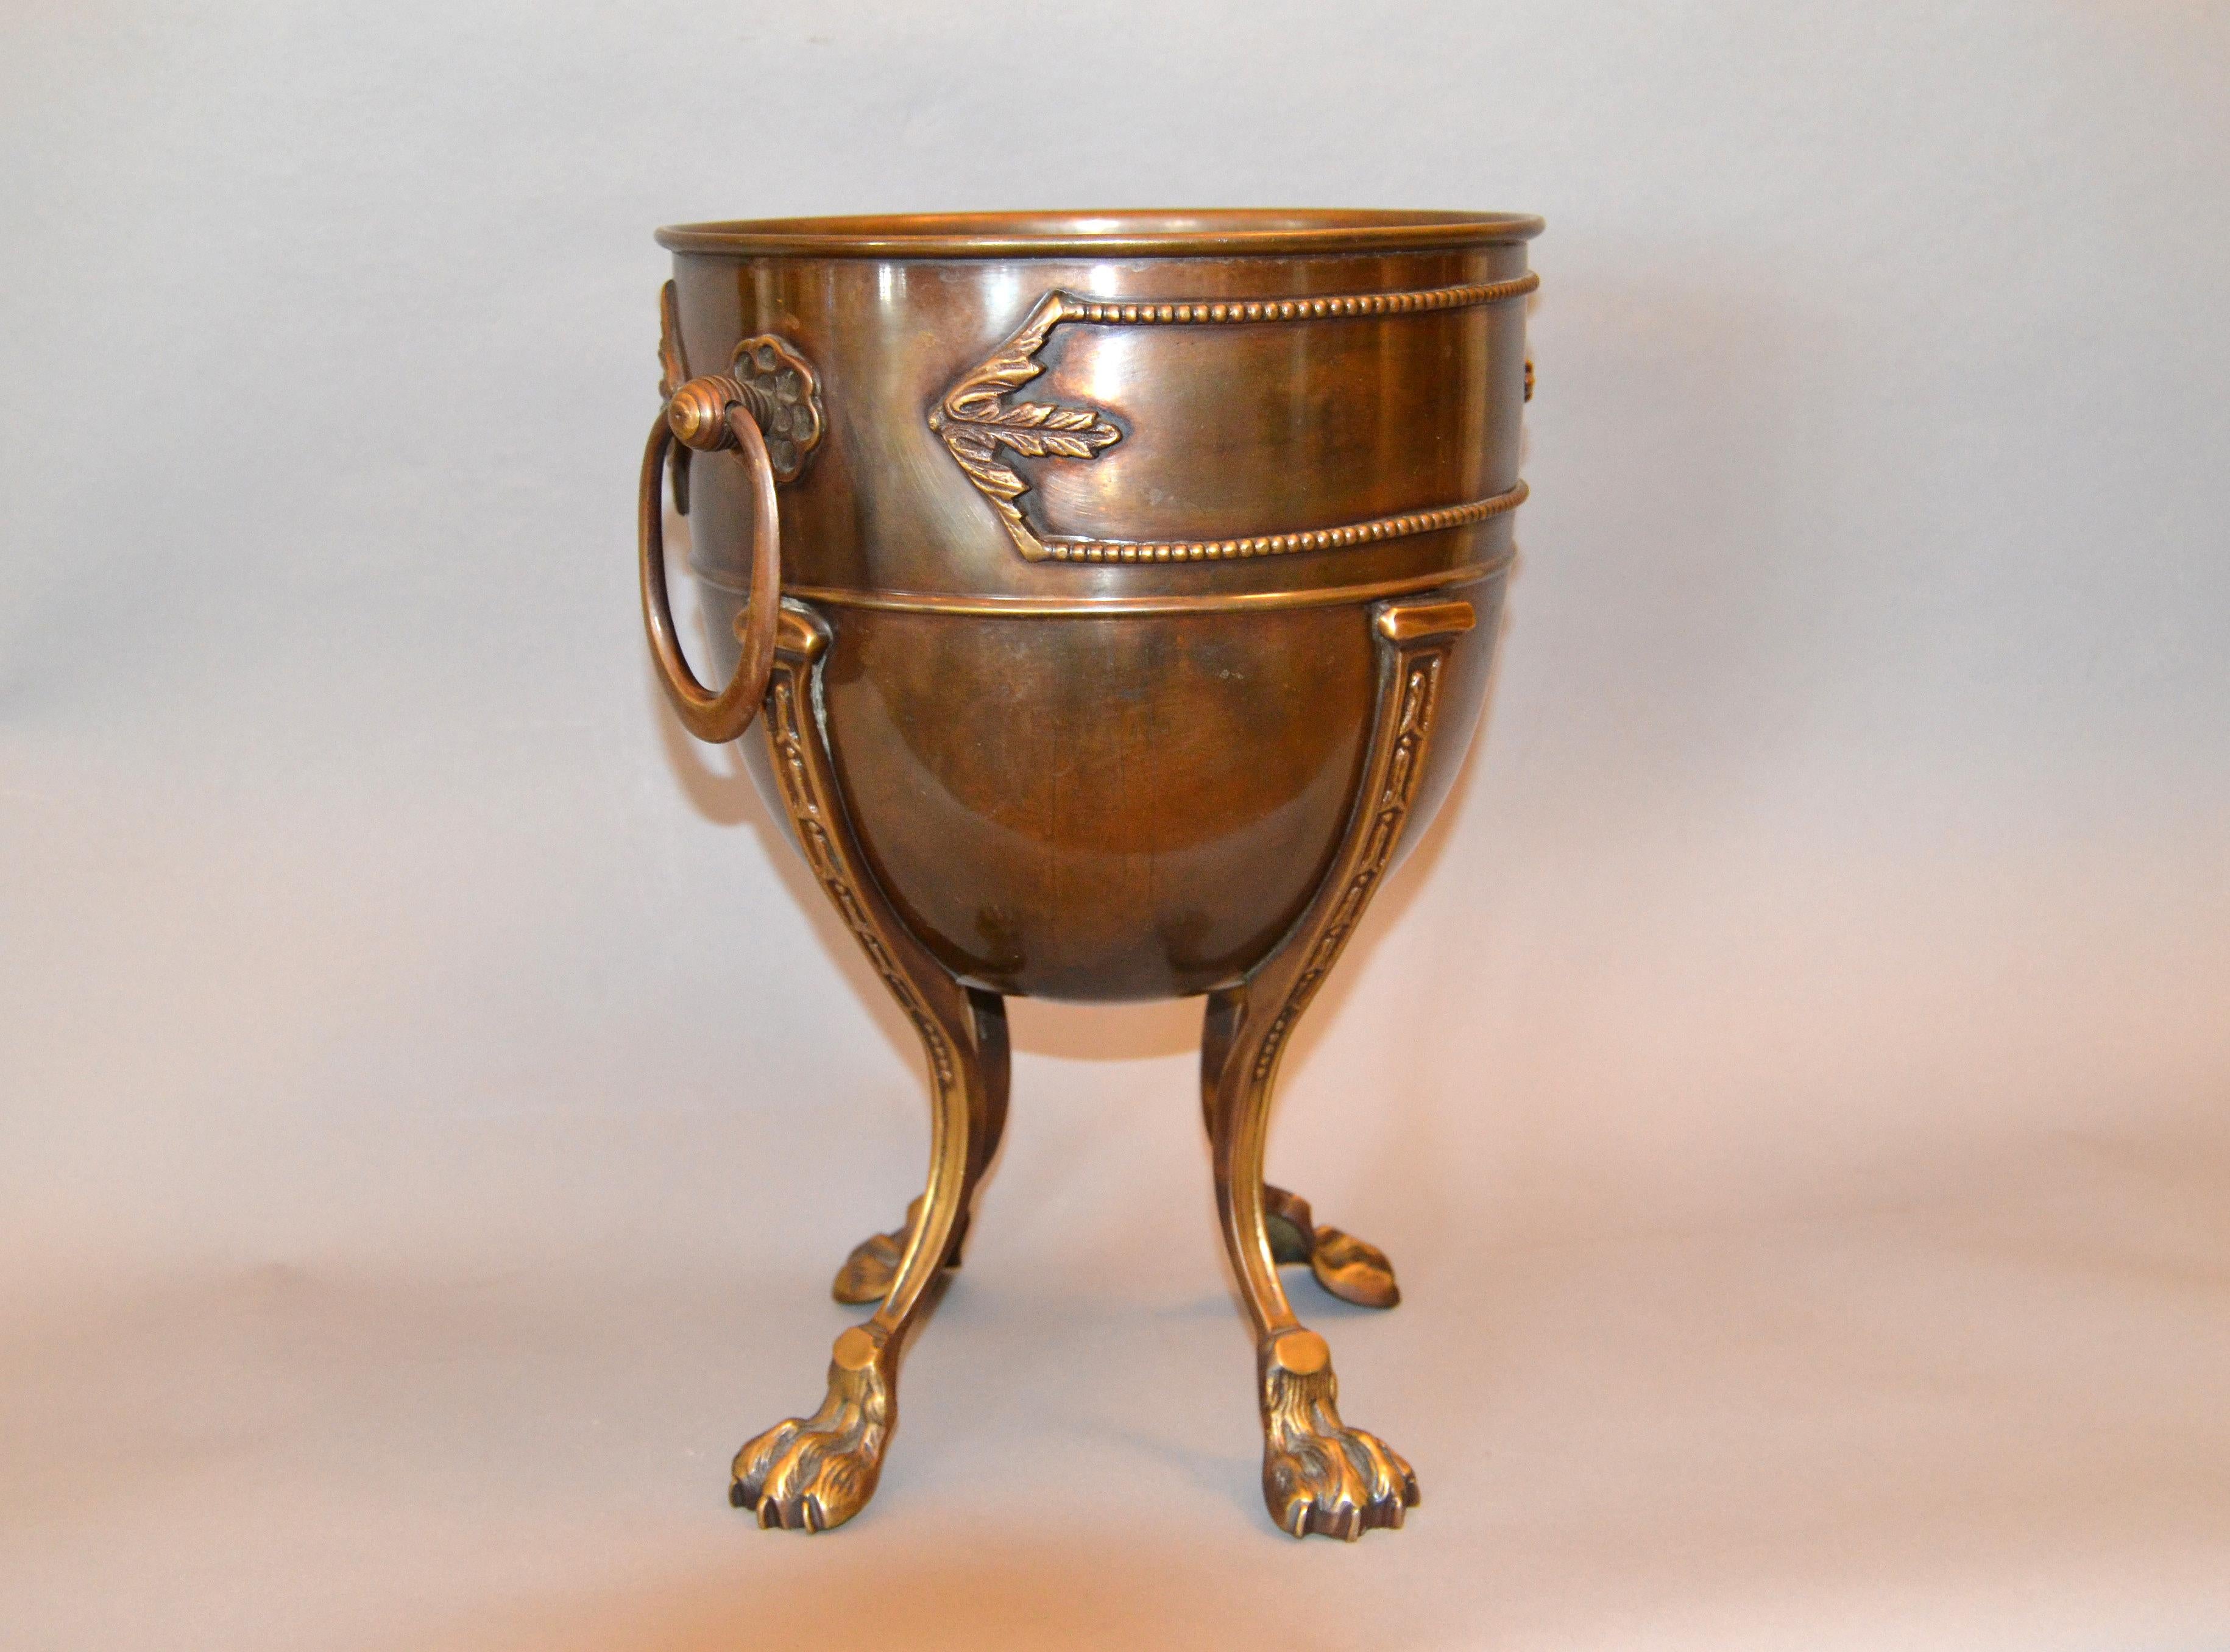 Vintage handcrafted ornate bronze ice bucket or wine bucket with four legs claw feet.
Extraordinary crafted with lots of details.
 